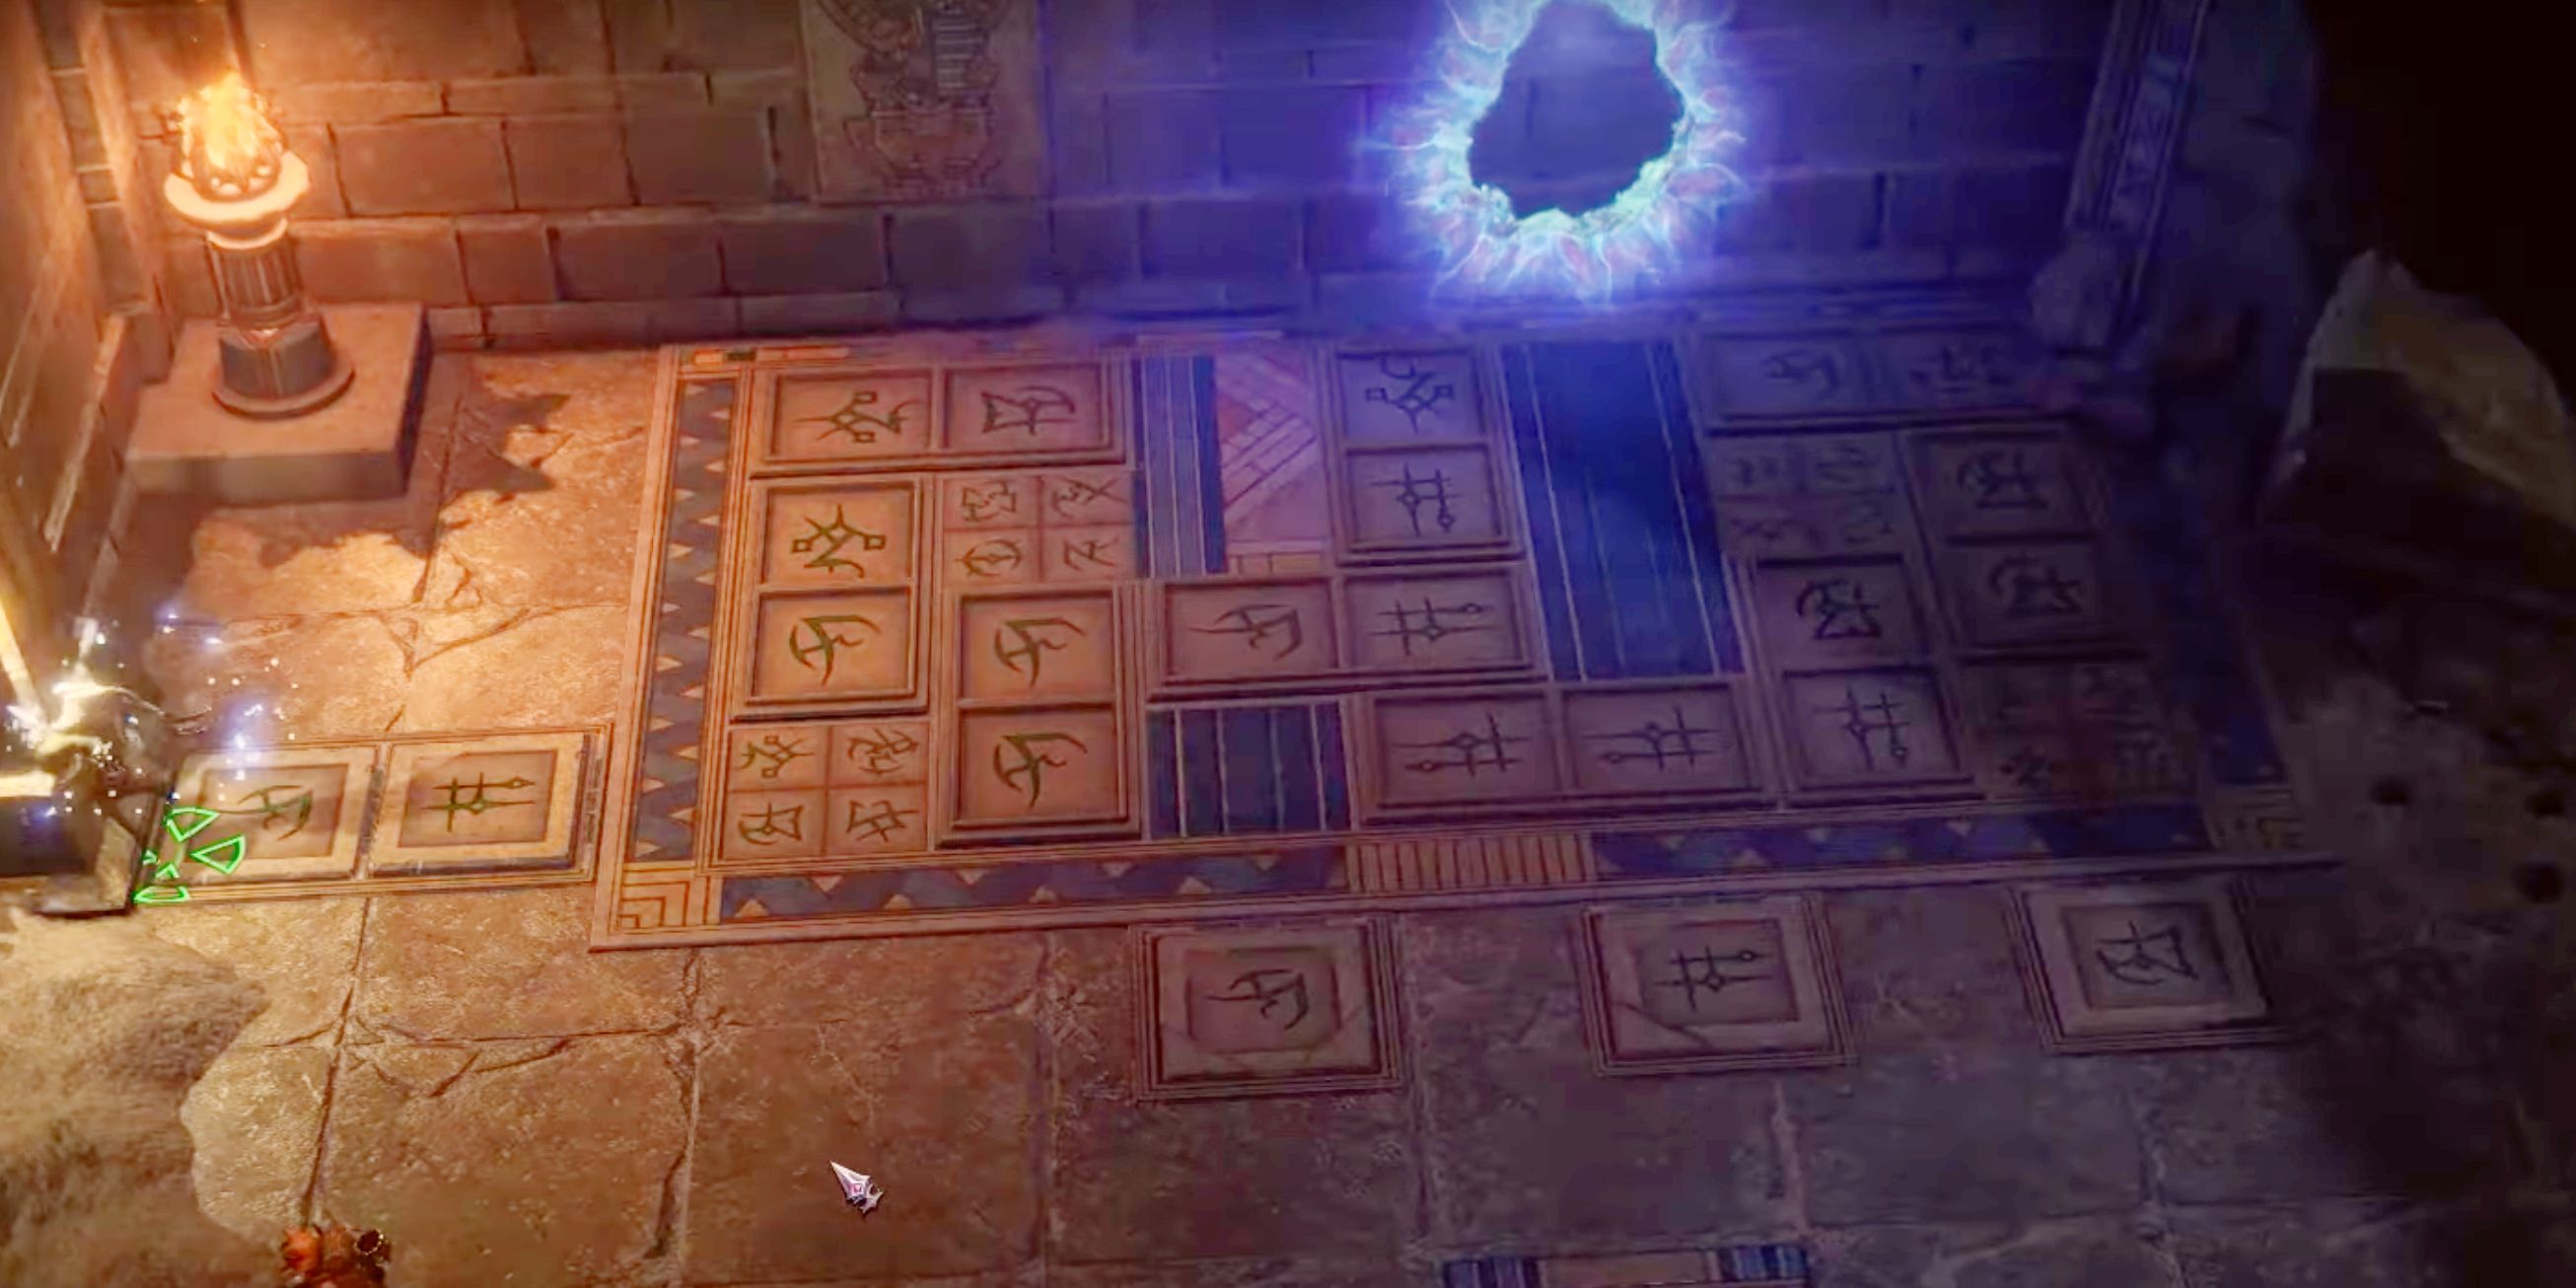 The Forgotten Secrets Slab Puzzle in Pathfinder: Wrath of the Righteous